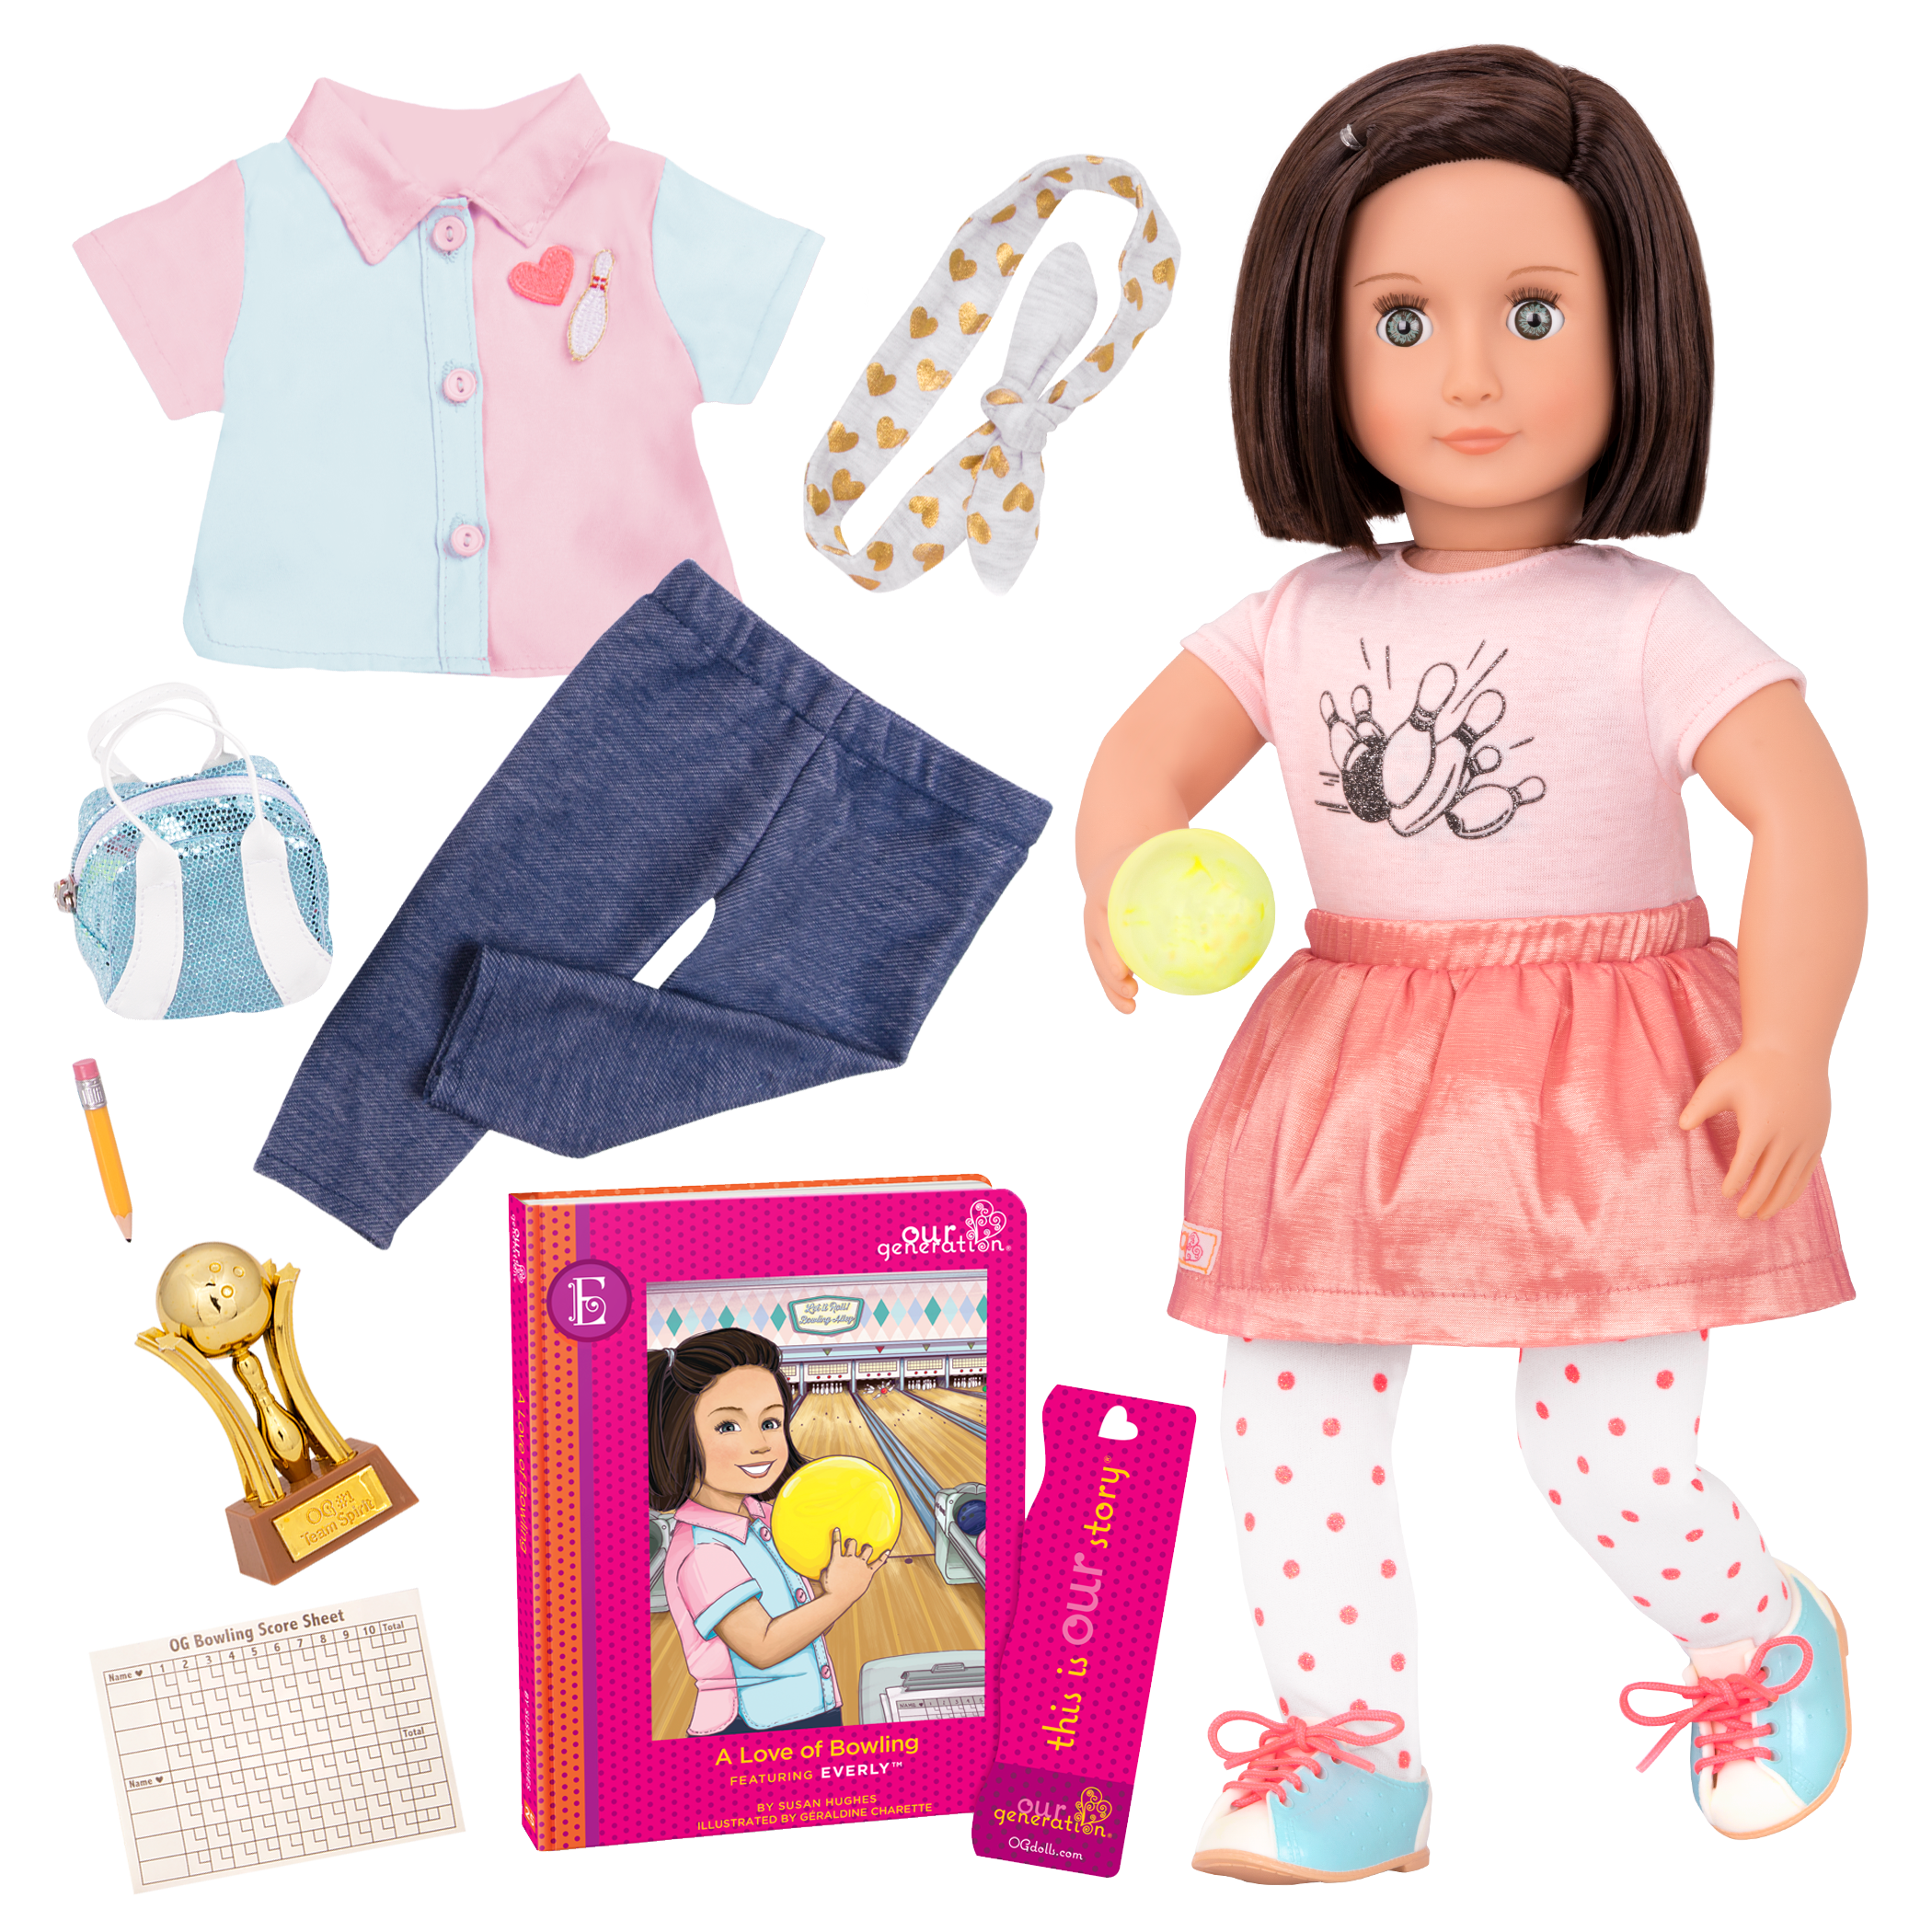 Everly Deluxe 18-inch Bowling Doll with Storybook